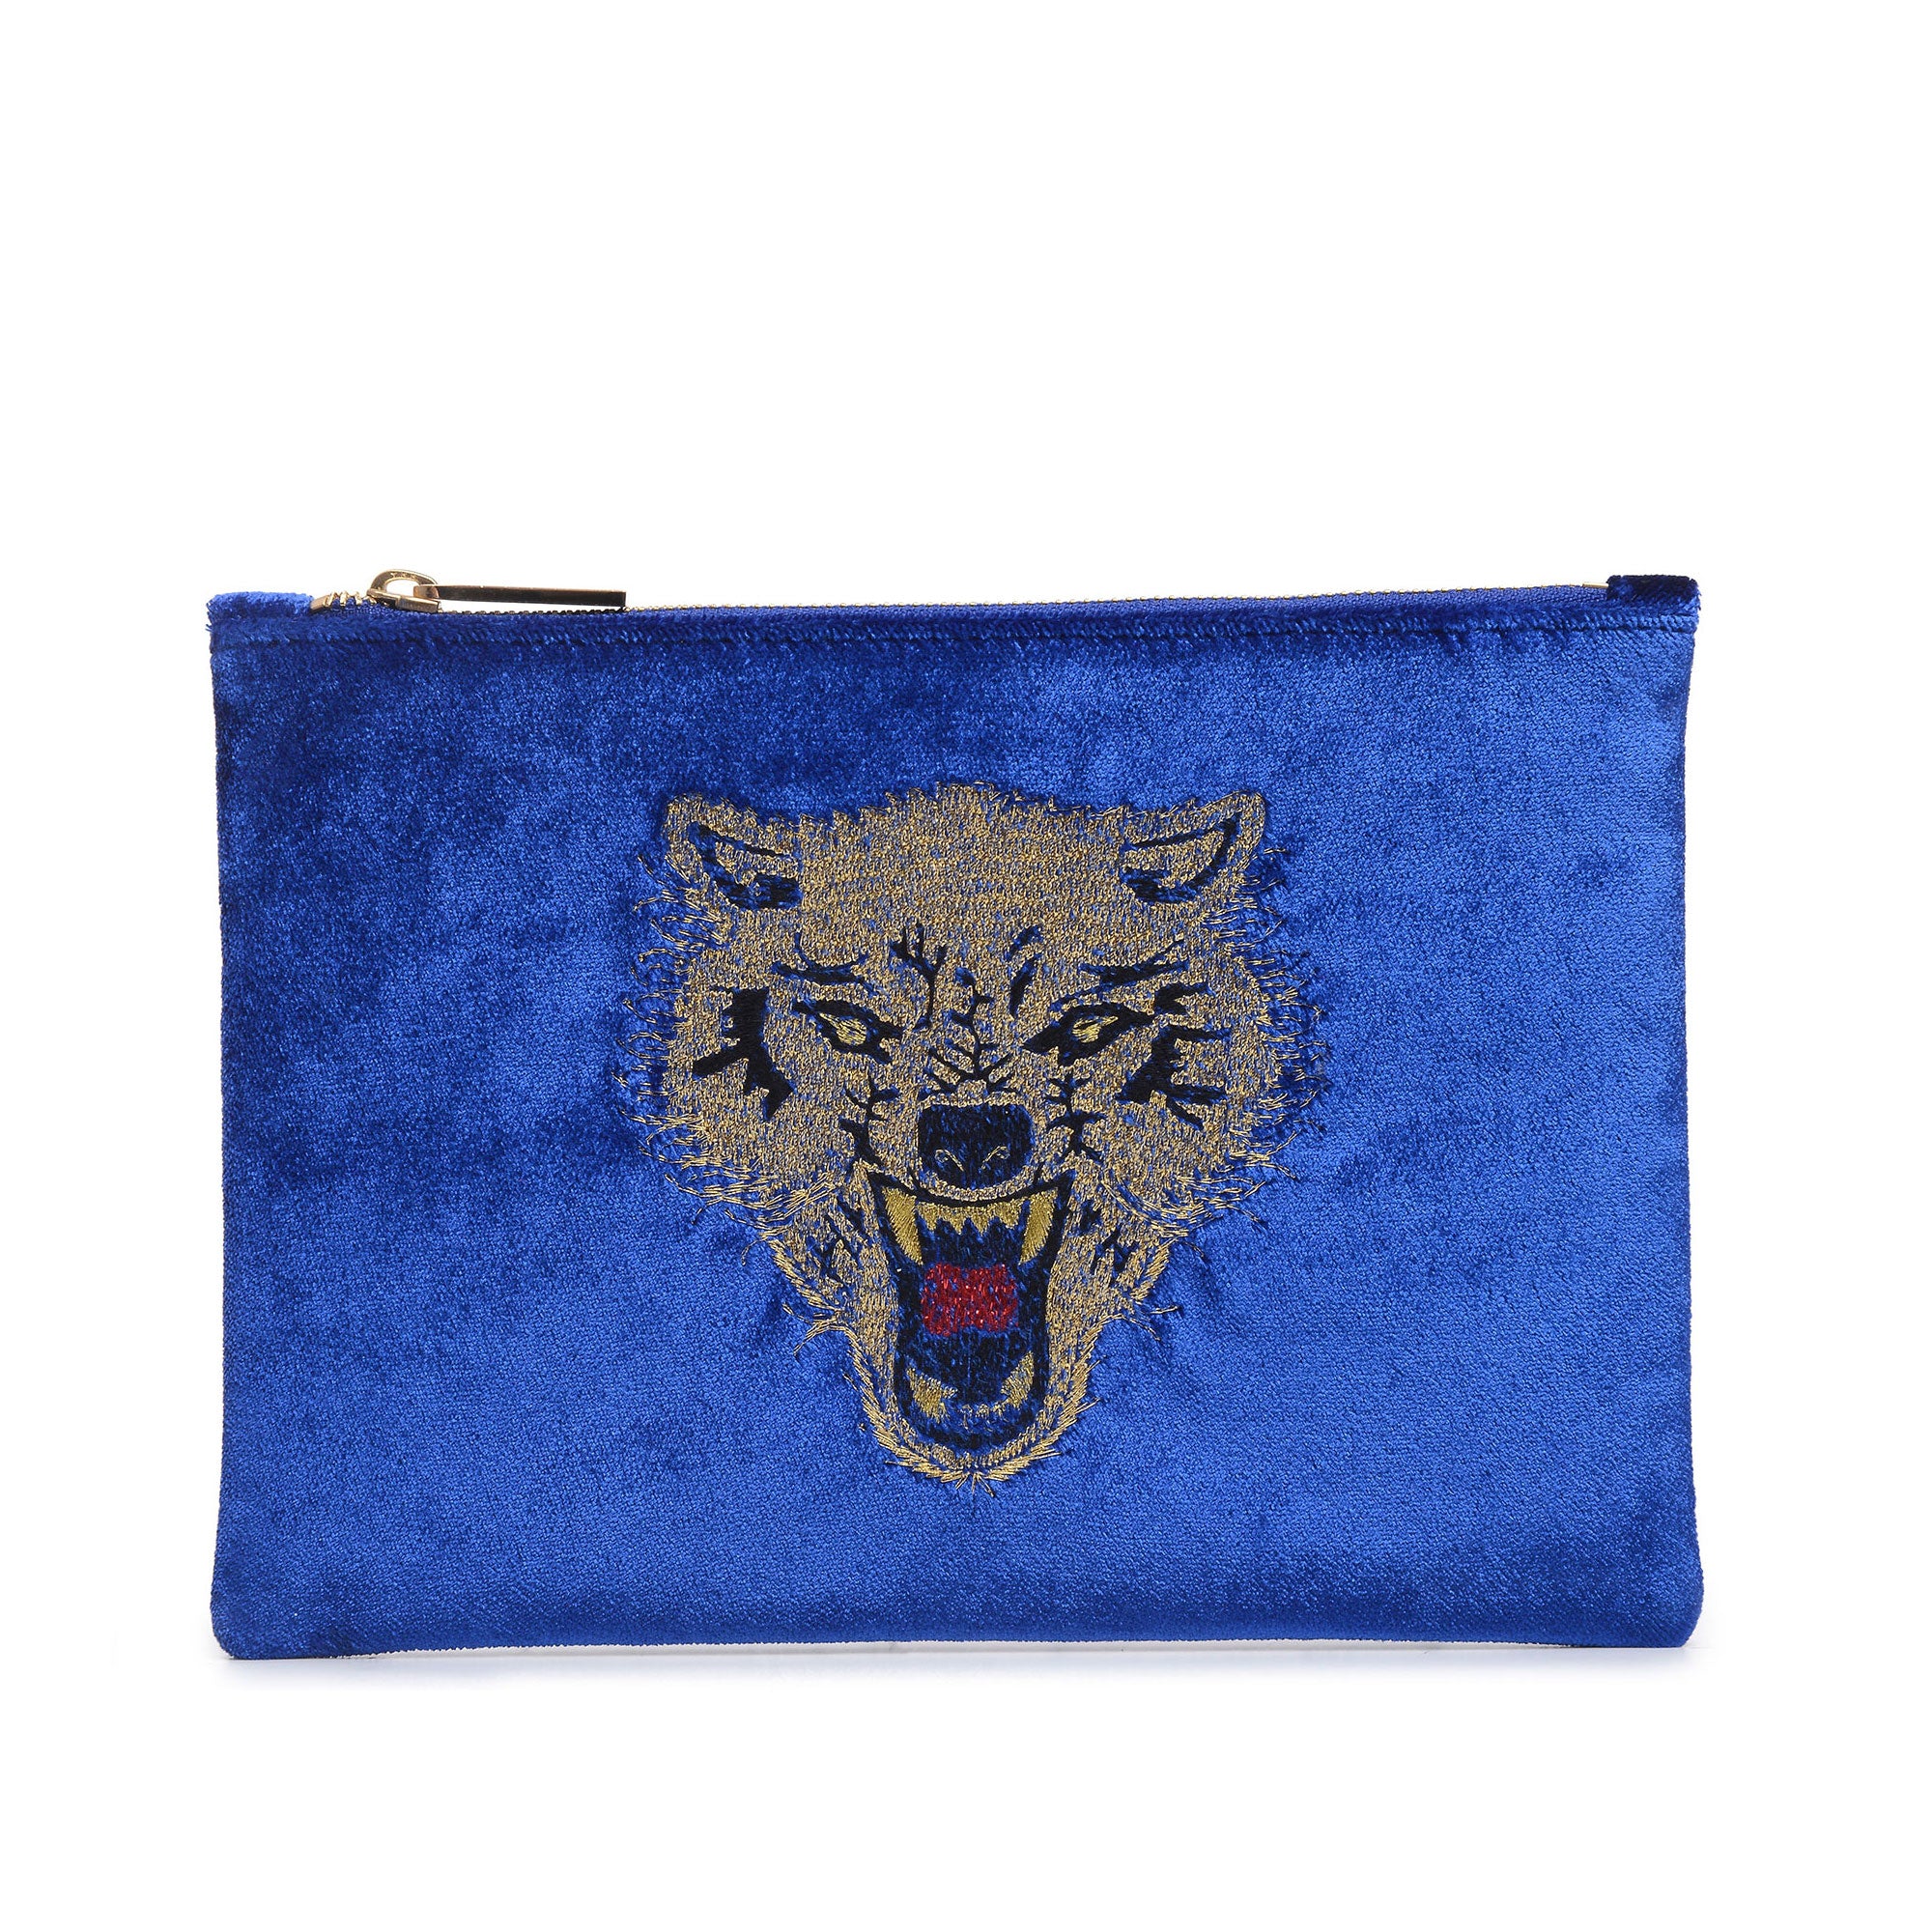 WOLF EMBROIDERED CLUTCH BAG